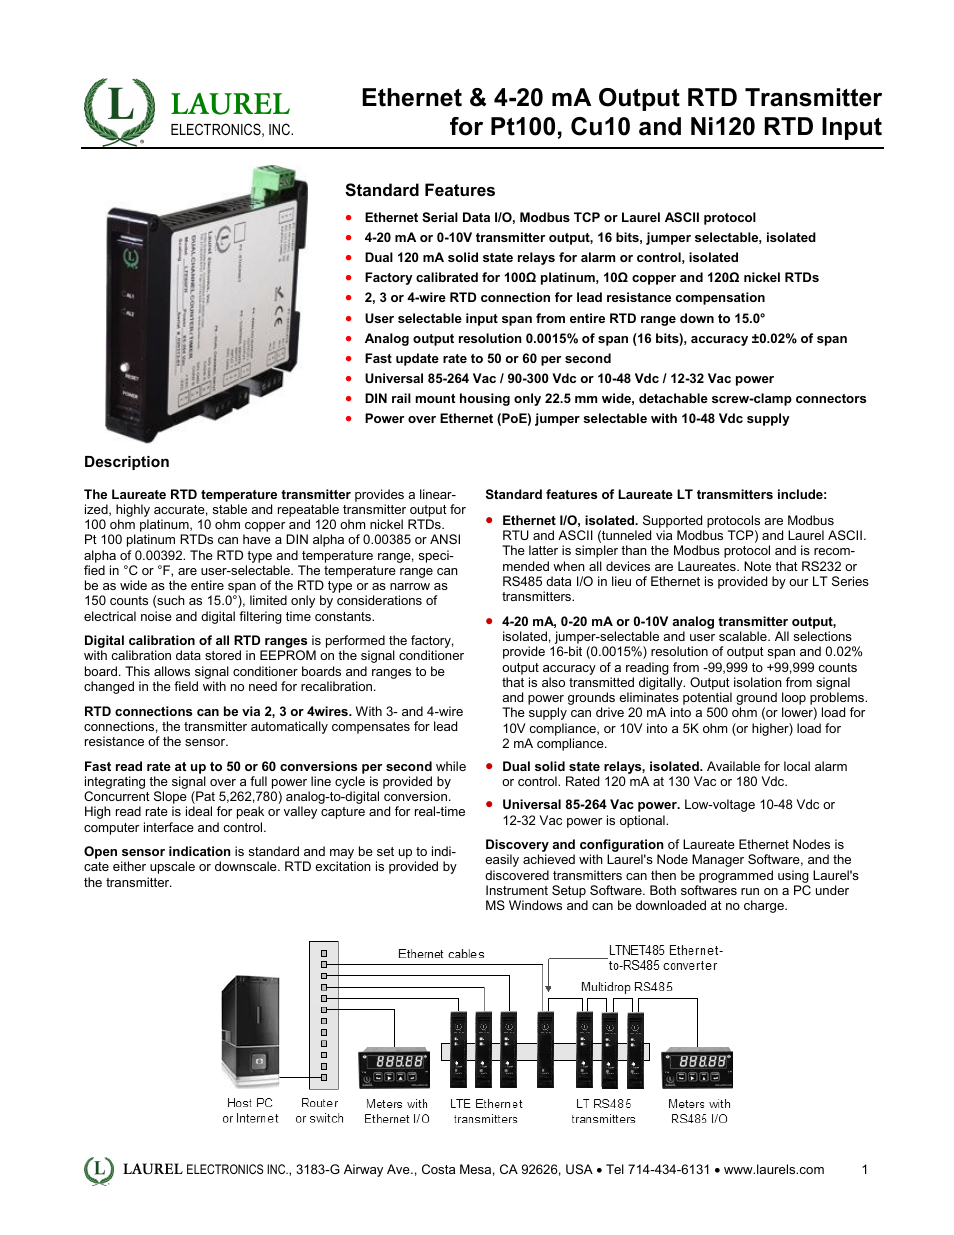 LTE: Ethernet & 4-20 mA Output RTD Transmitter for Pt100, Cu10 and Ni120 RTD Input